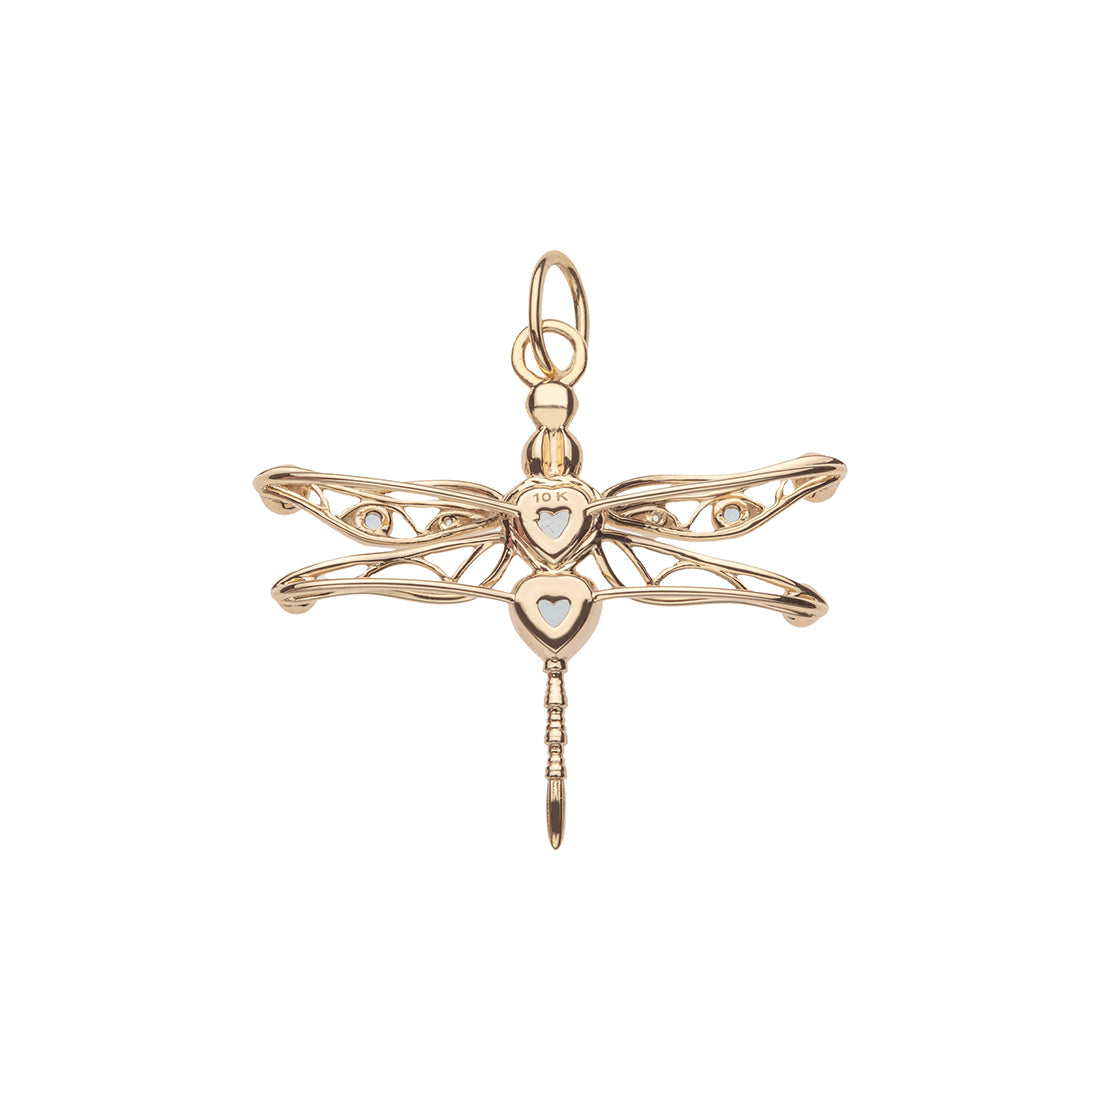 PEACE Dragonfly Pendant in Solid Gold